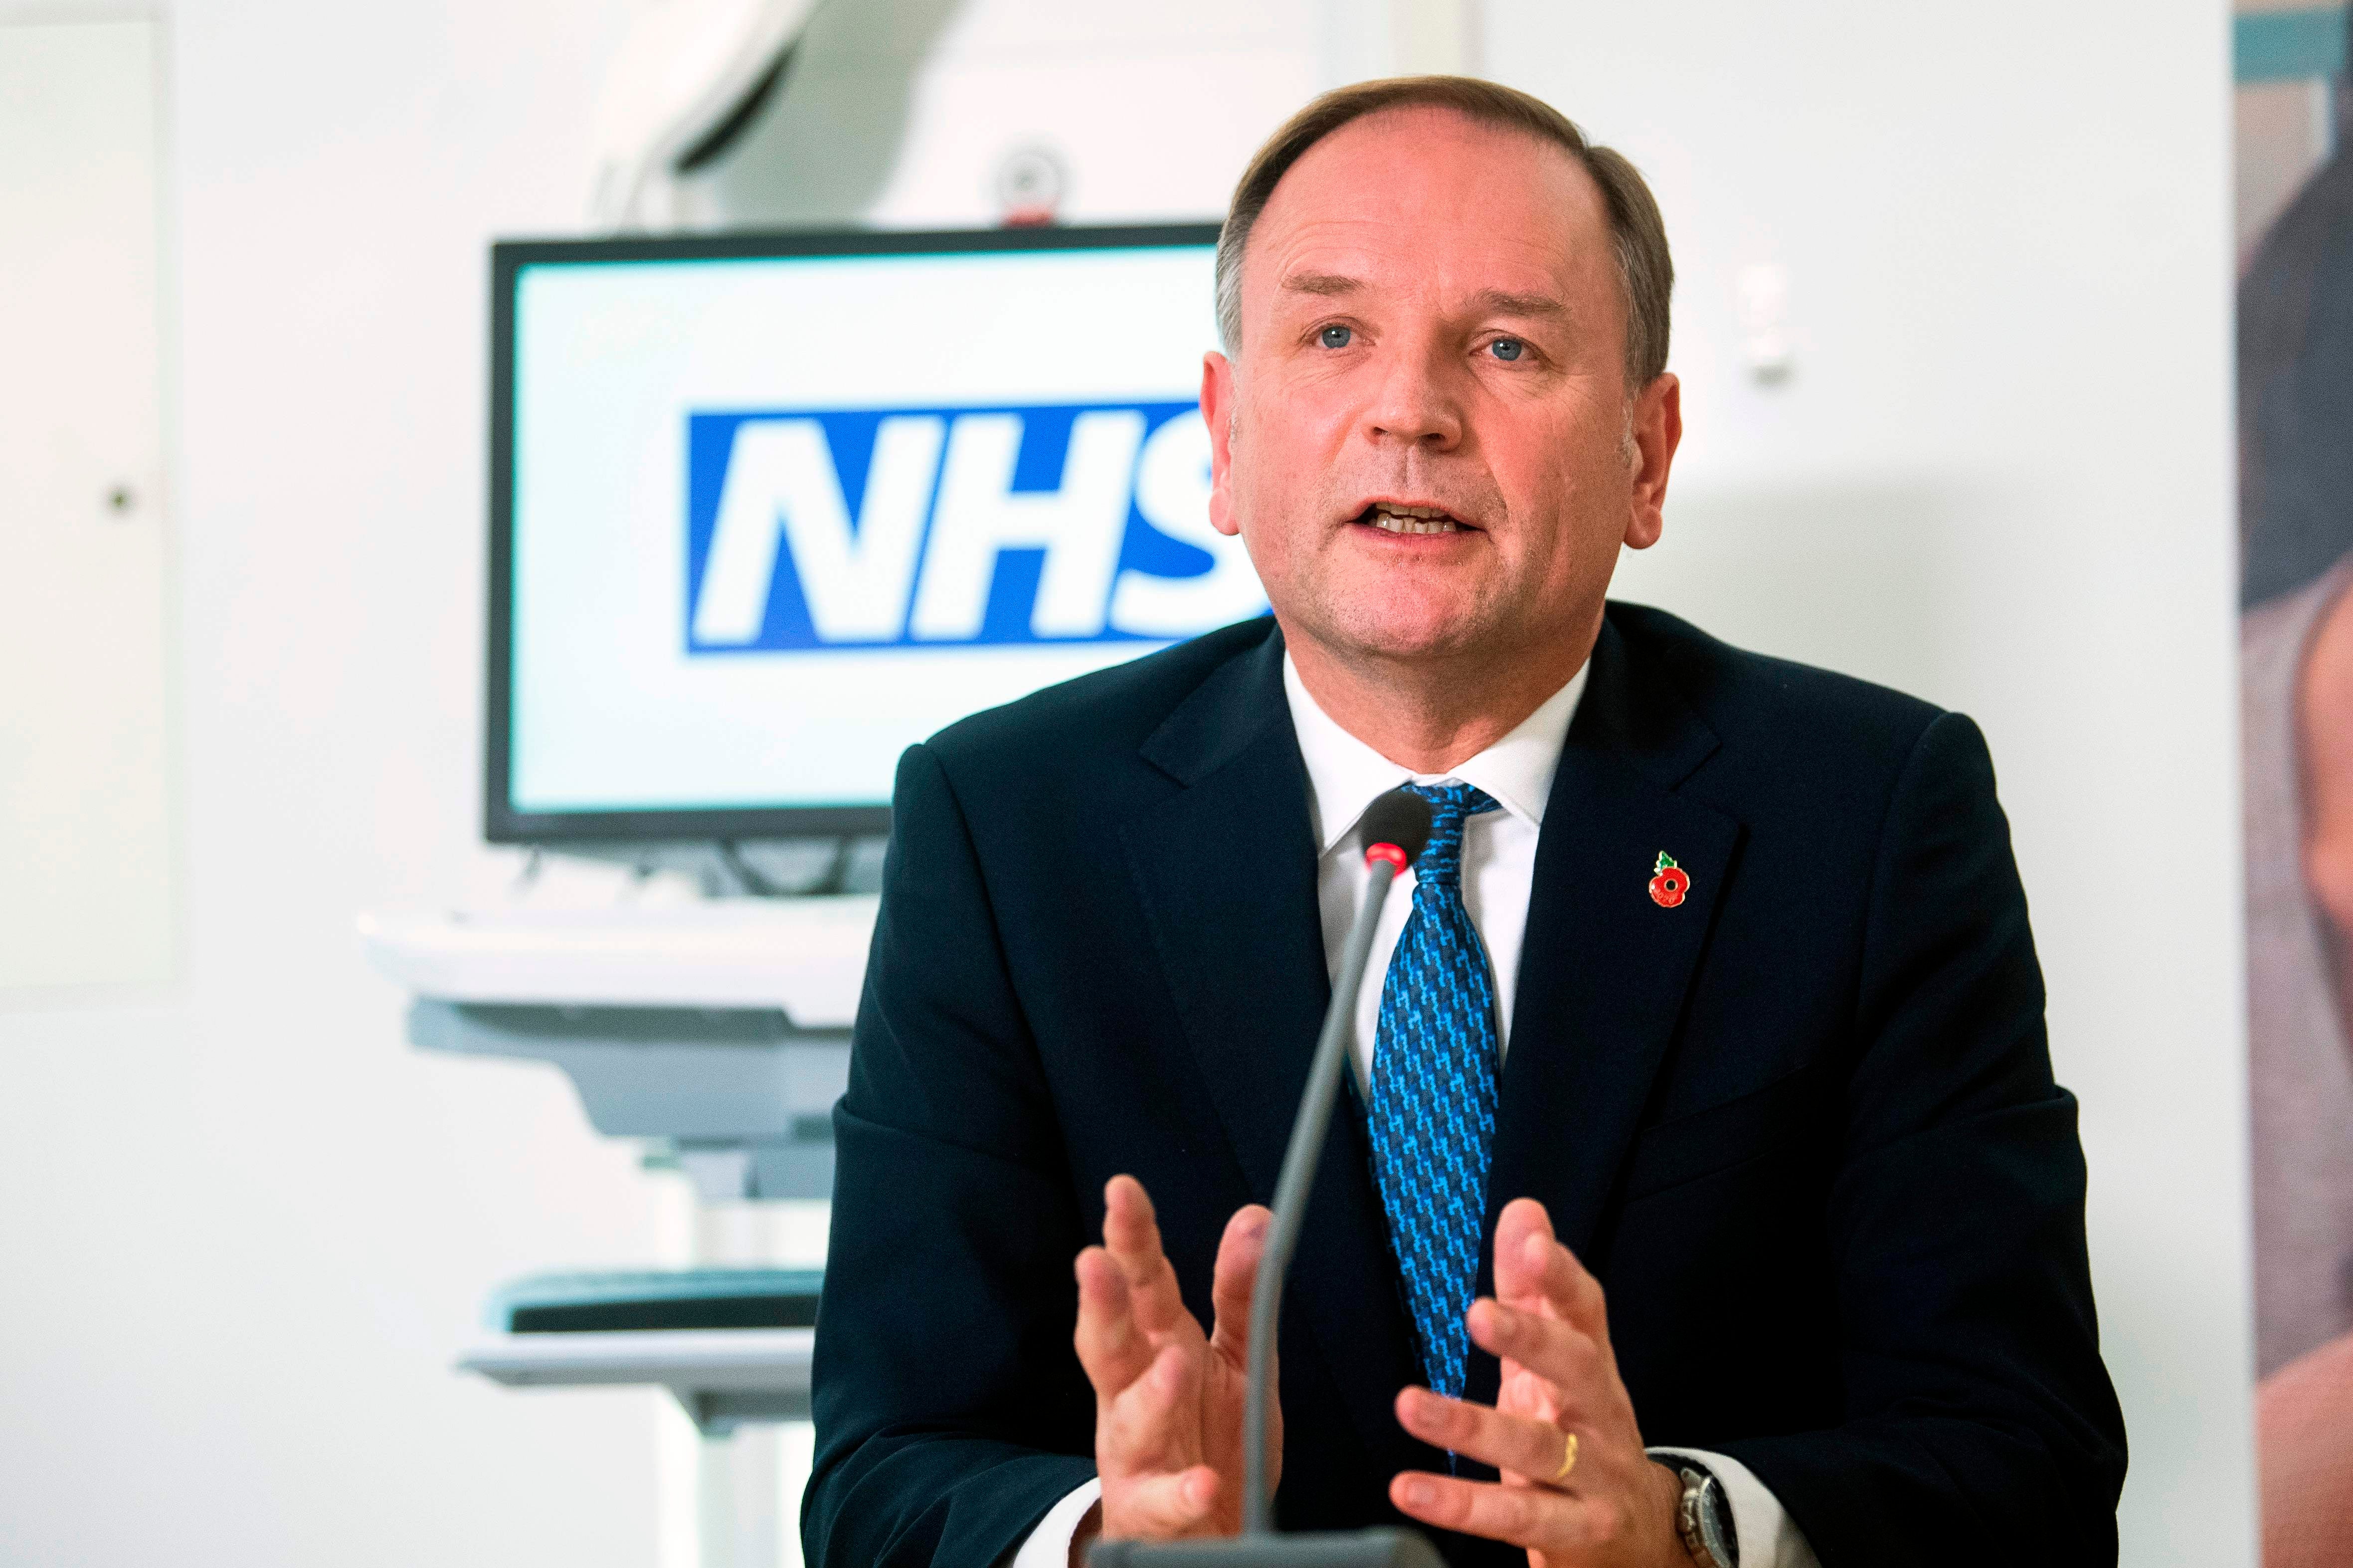 Head of NHS England Sir Simon Stevens says the NHS is back in the eye of the storm from Covid-19